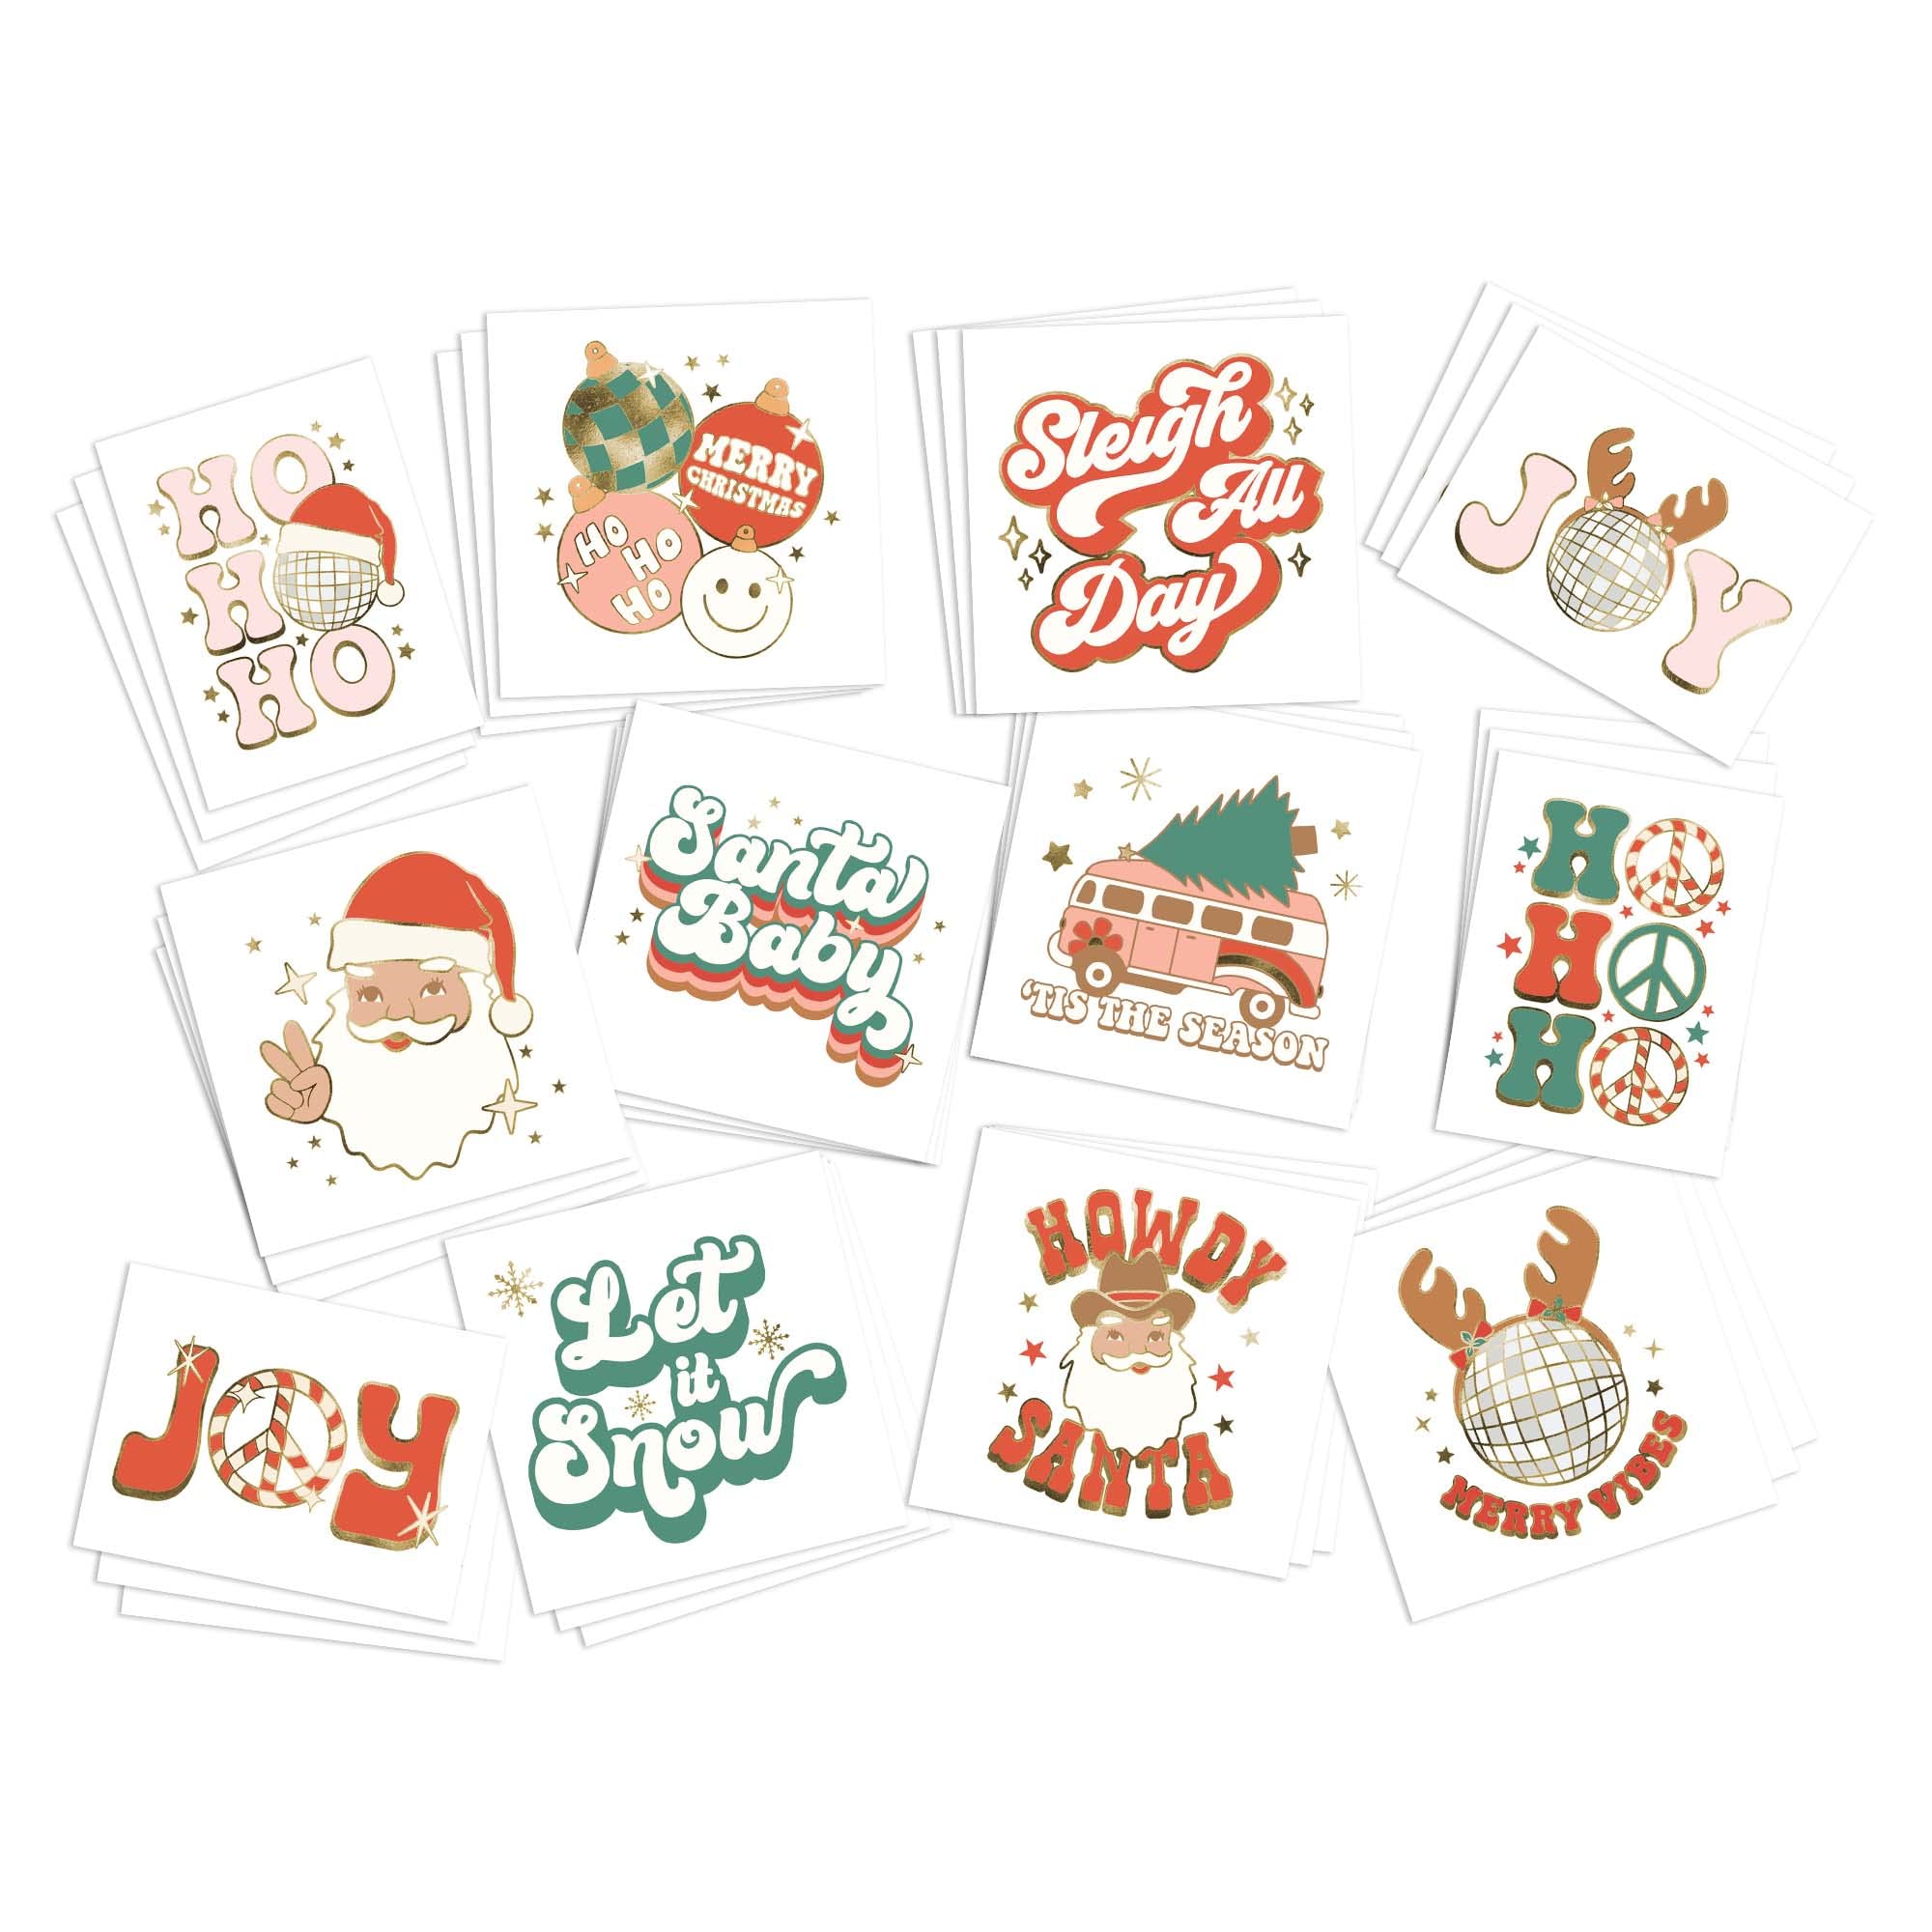 Retro Christmas Temporary Tattoos | Pack of 36 | Full Color with Gold Metallic Highlights | MADE IN THE USA | Skin Safe | Removable